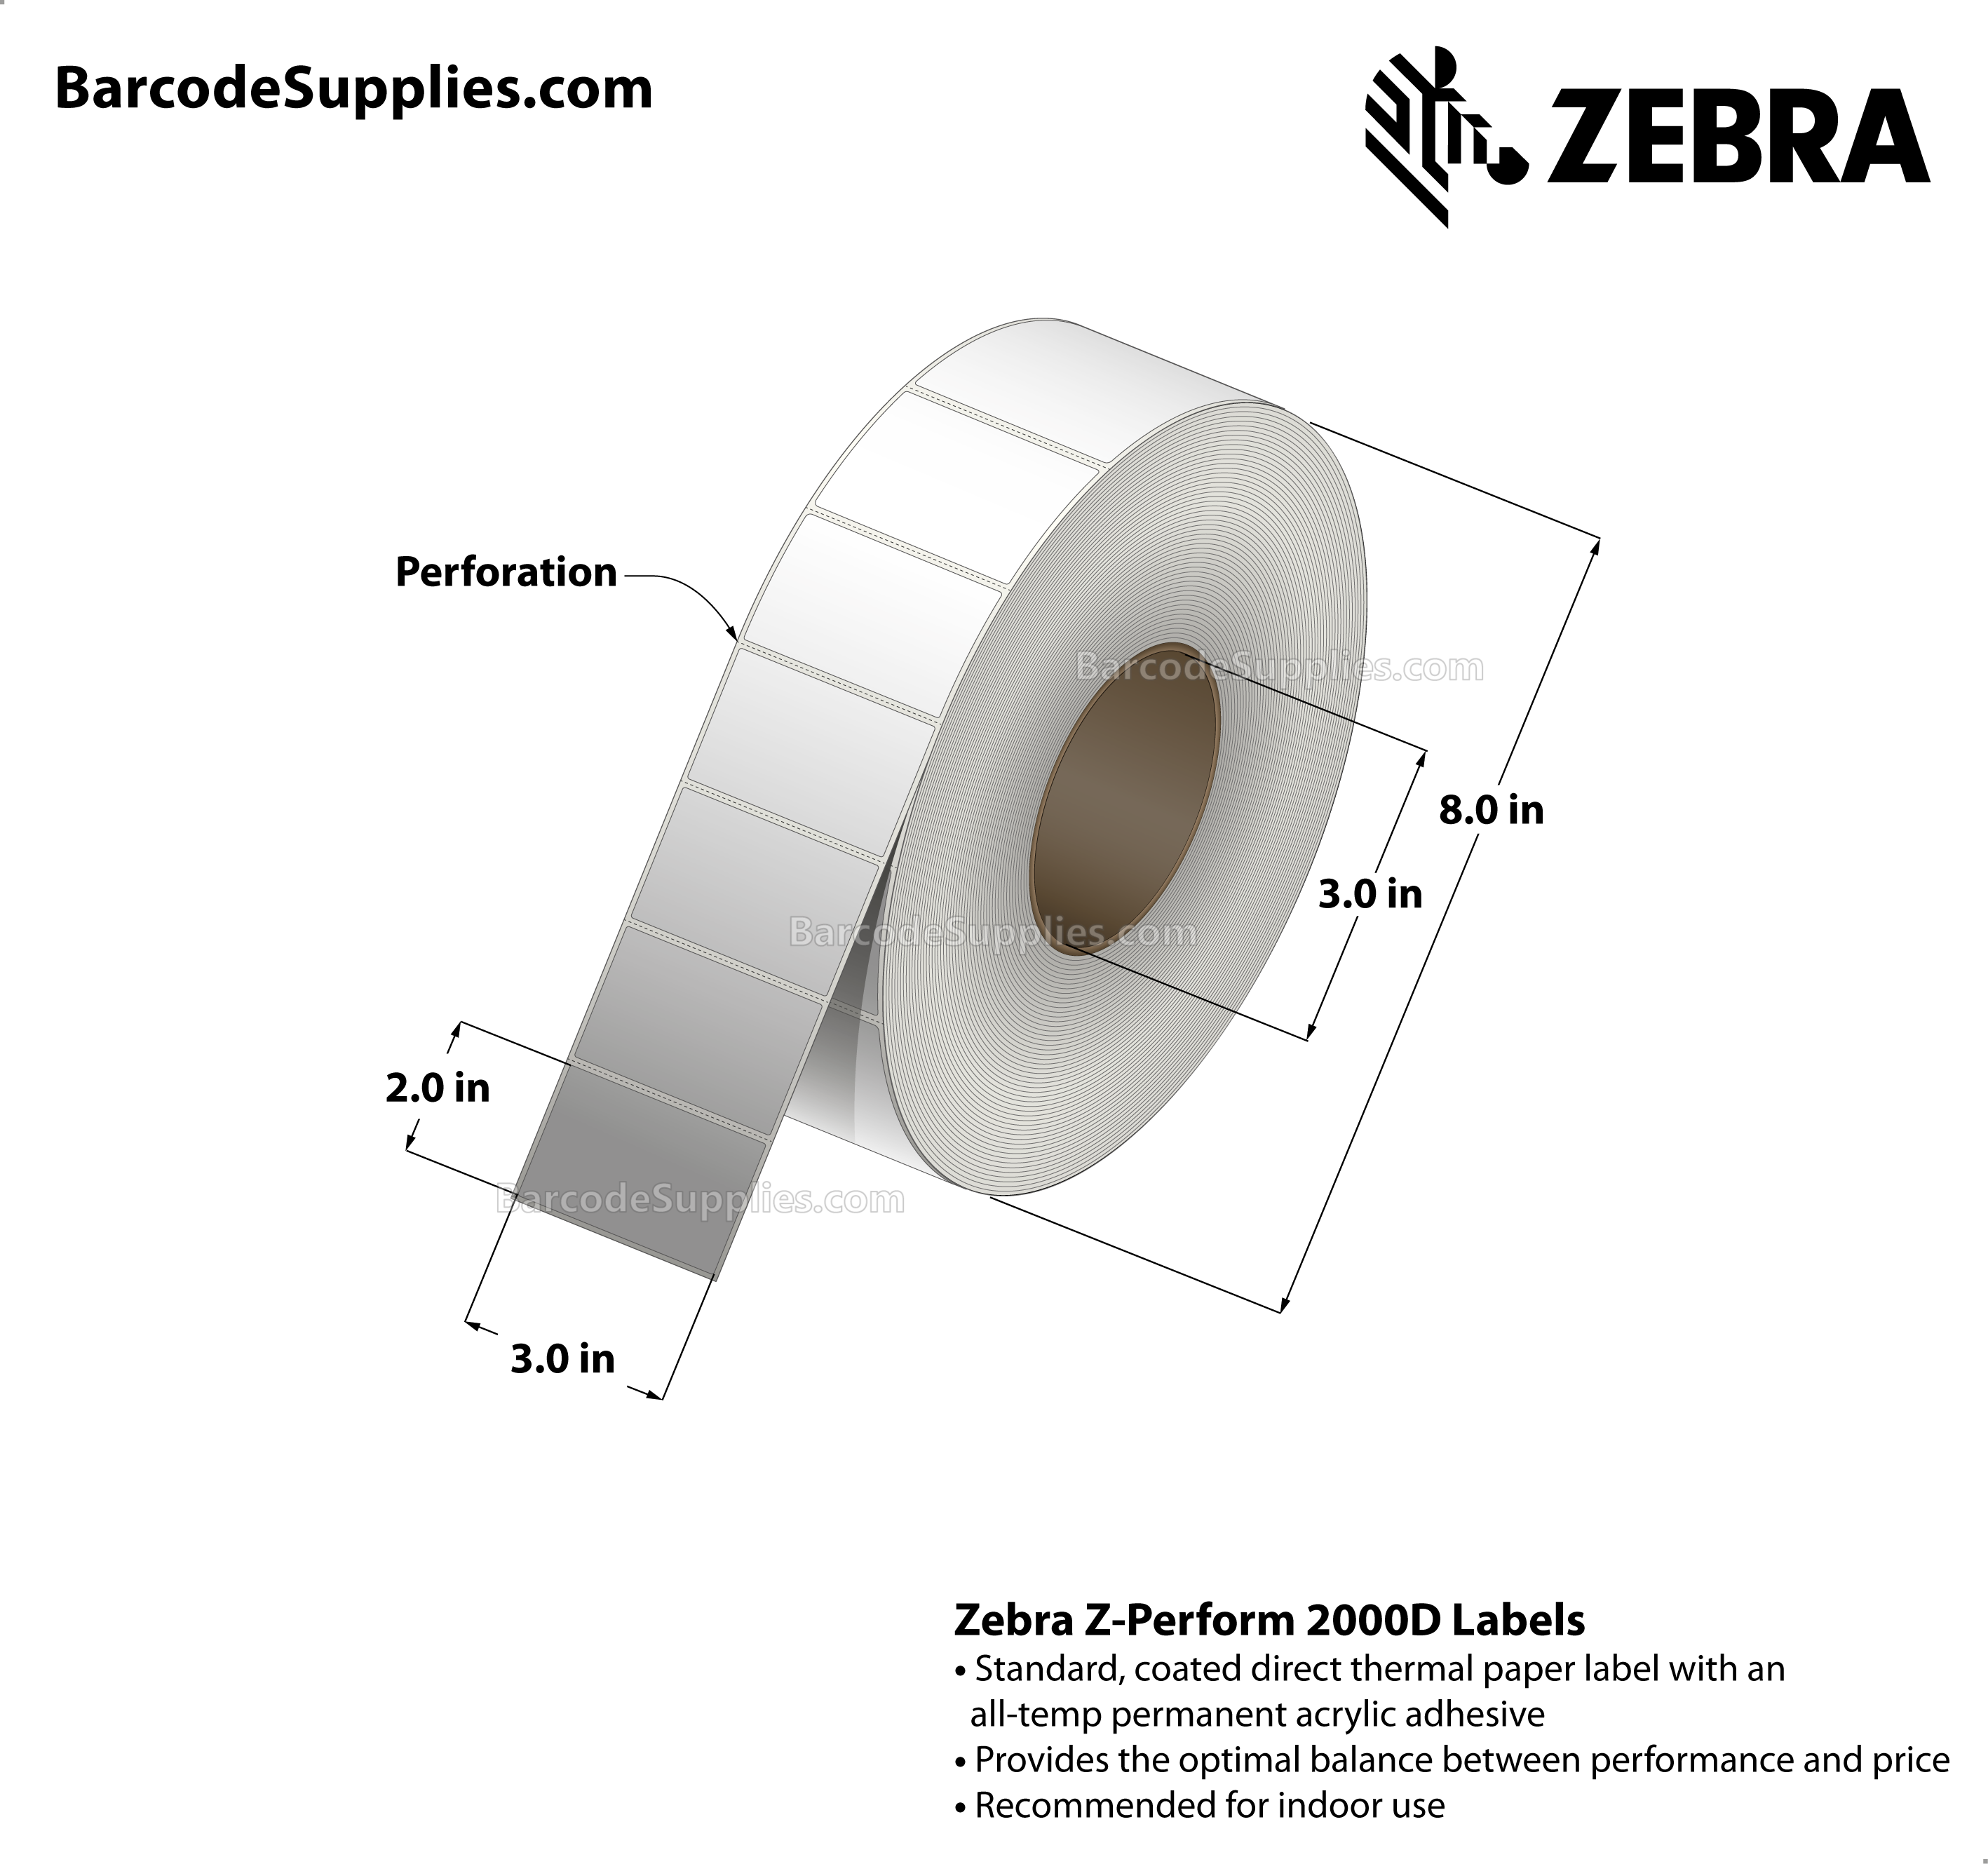 3 x 2 Direct Thermal White Z-Perform 2000D Labels With All-Temp Adhesive - Perforated - 2750 Labels Per Roll - Carton Of 6 Rolls - 16500 Labels Total - MPN: 10000295